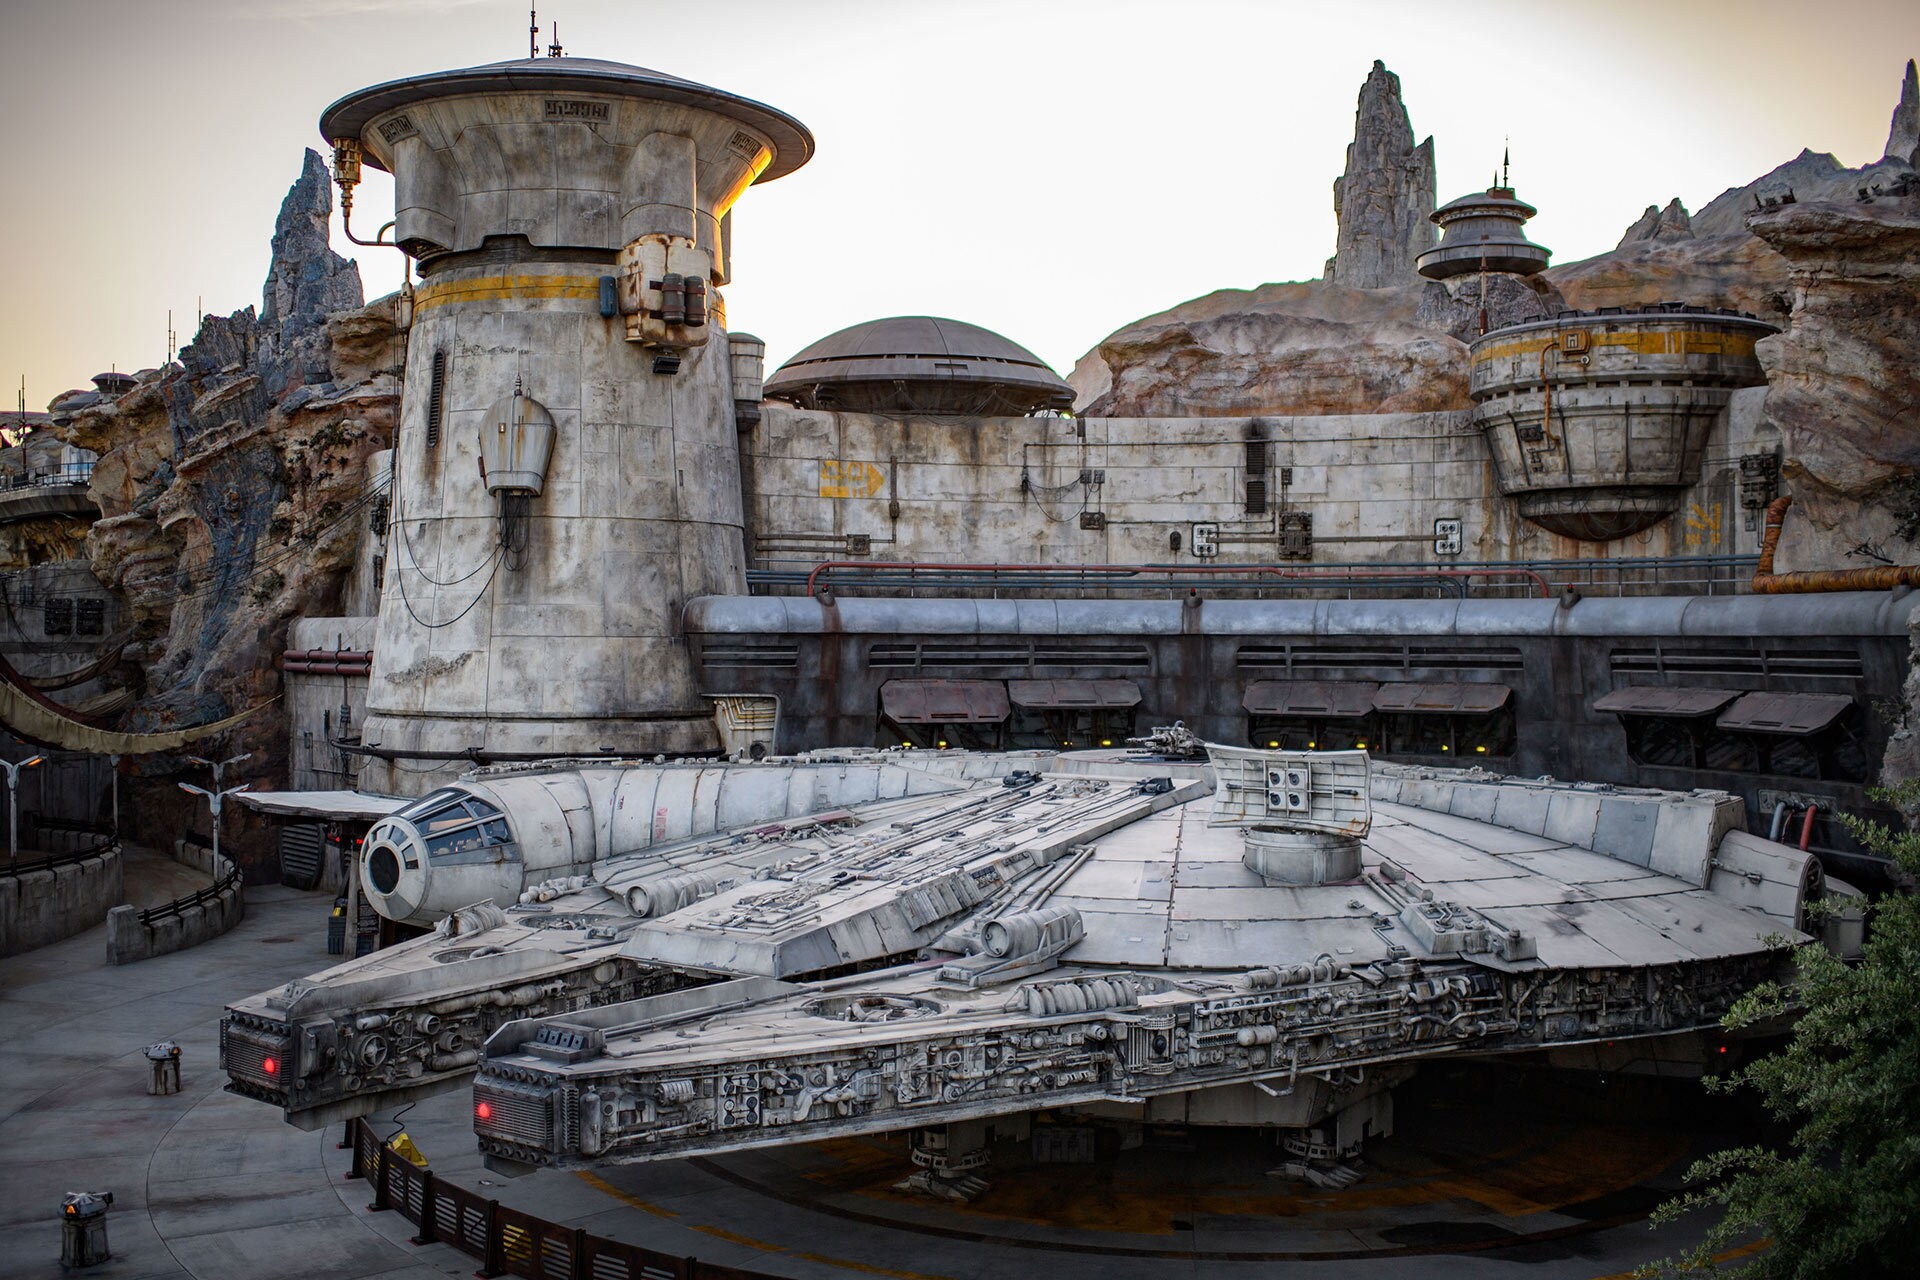 The Millennium Falcon docked in the Black Spire Outpost Spaceport measures more than 100 feet long.